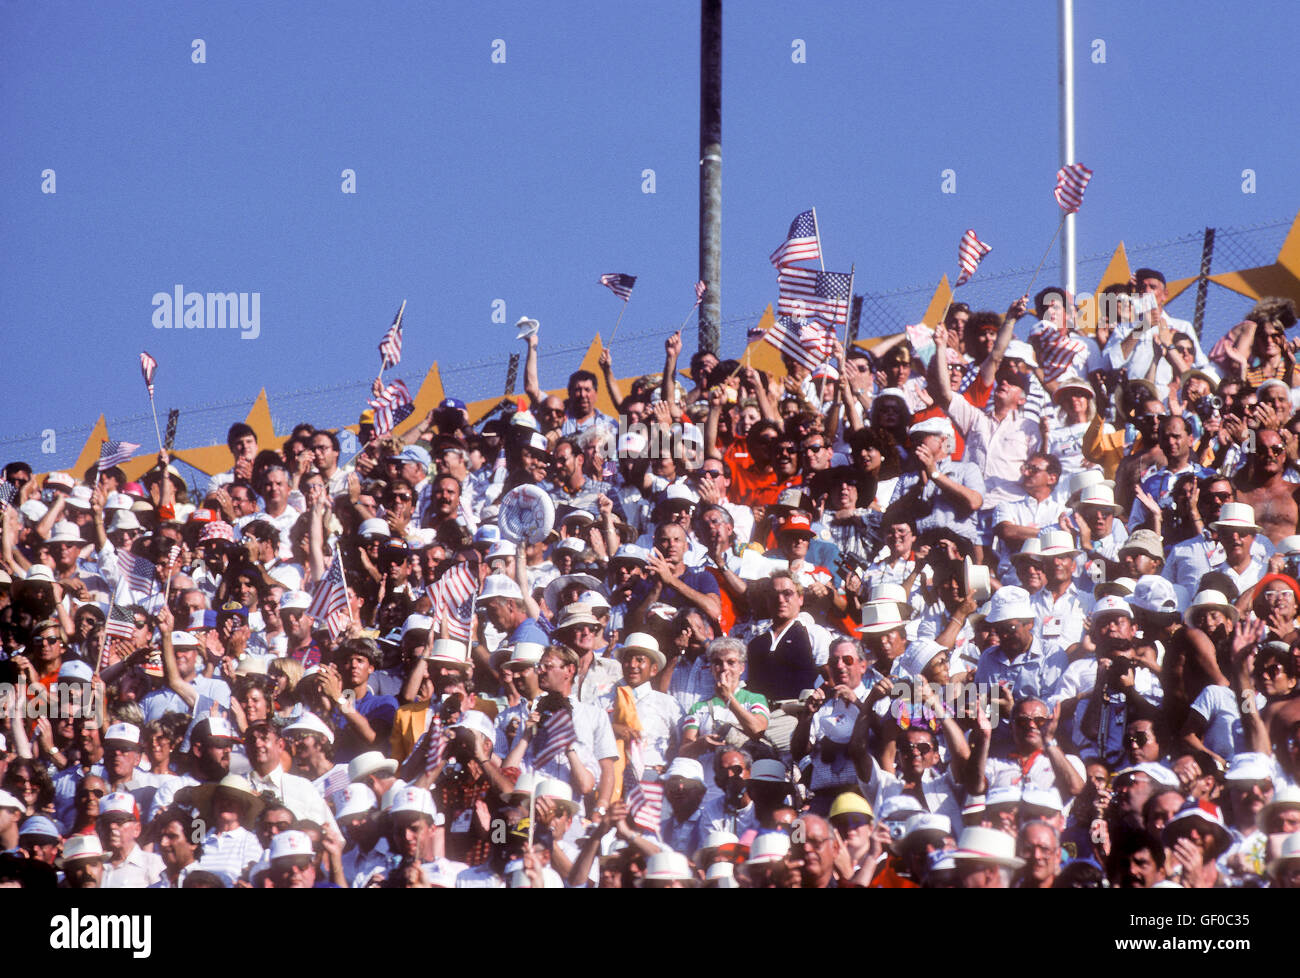 Crowd cheering in stadium at 1984 Olympic Games in Los Angeles. Stock Photo